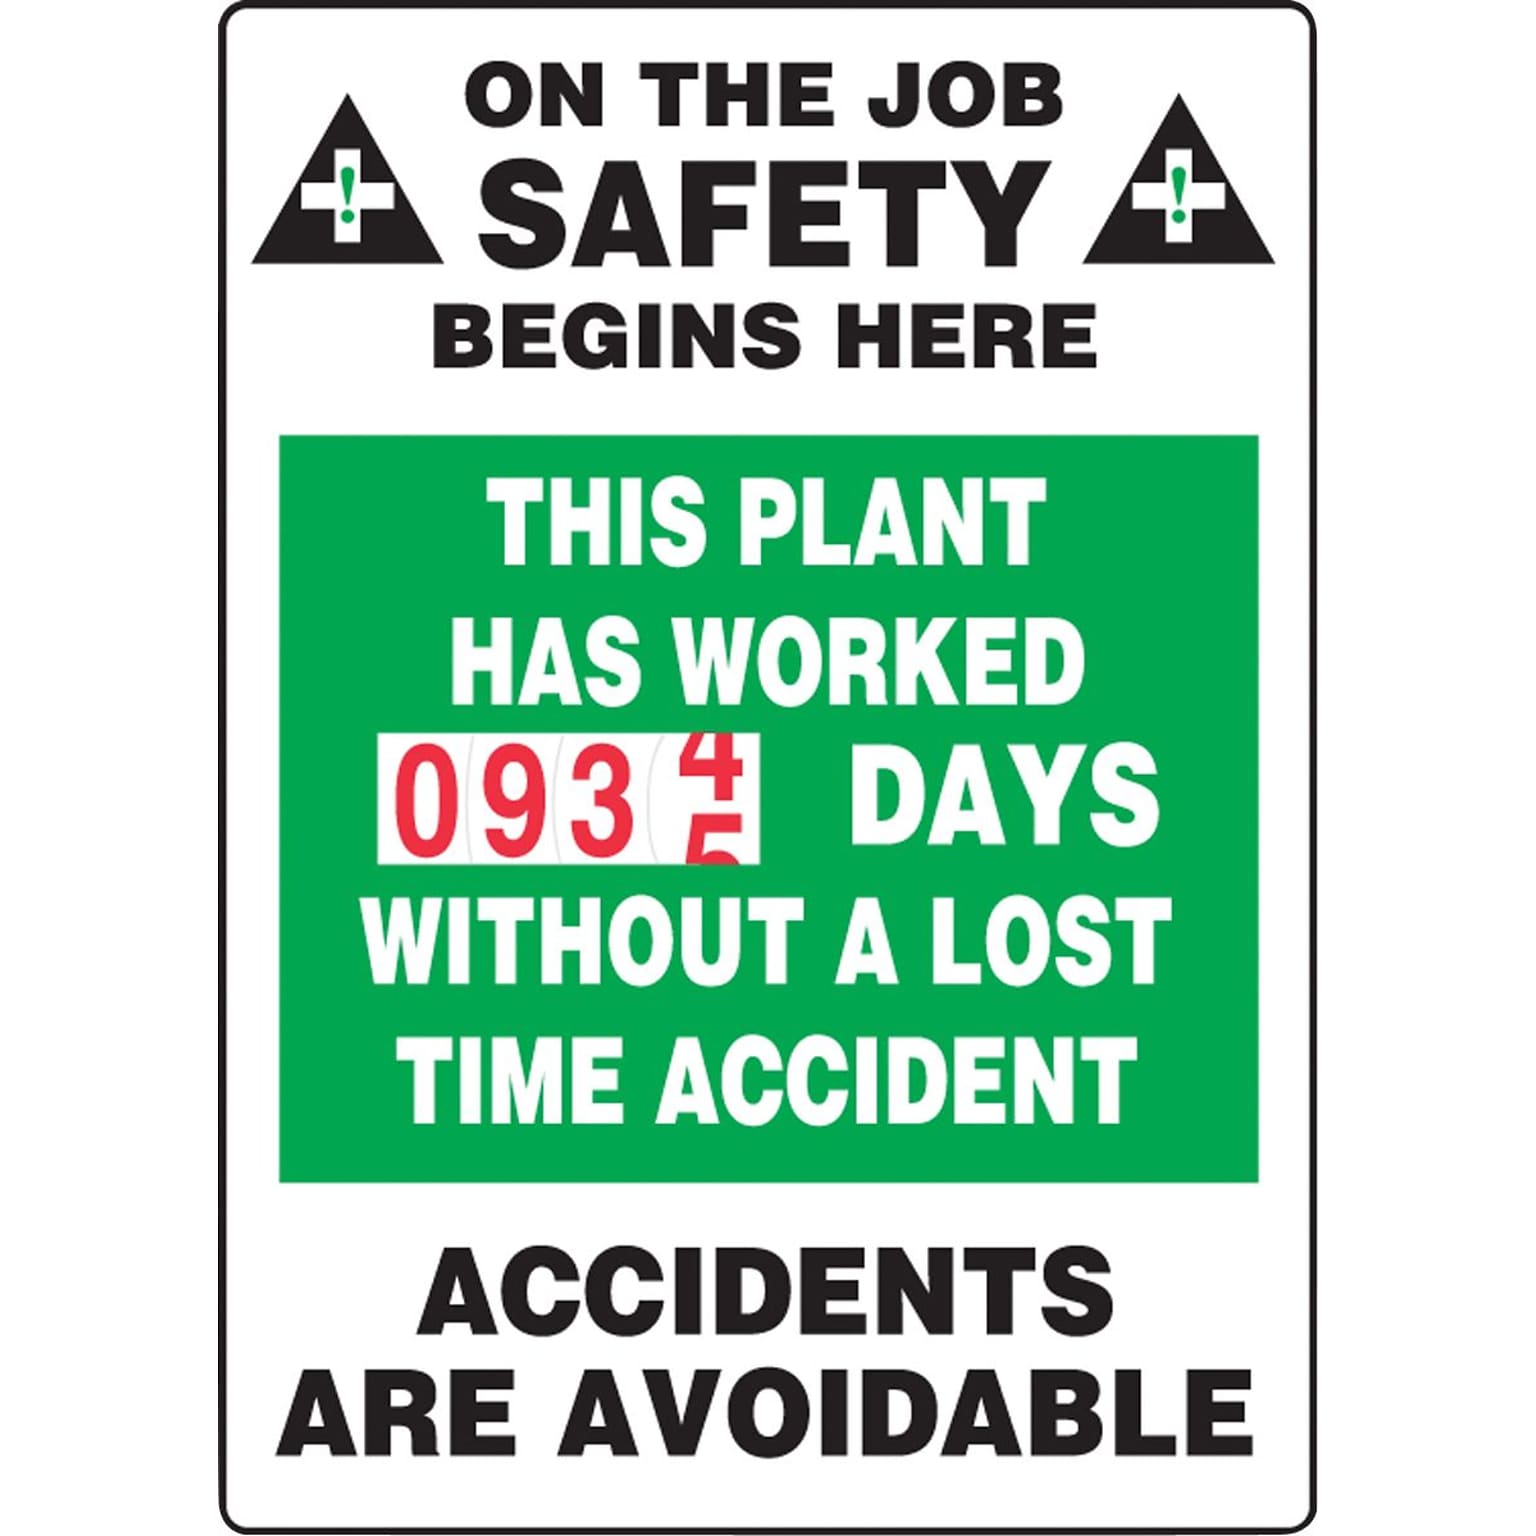 Accuform Turn-A-Day Scoreboard, THIS PLANT HAS WORKED # DAYS W/OUT ACCIDENT, 36x24, Plastic (MSCBDD13)